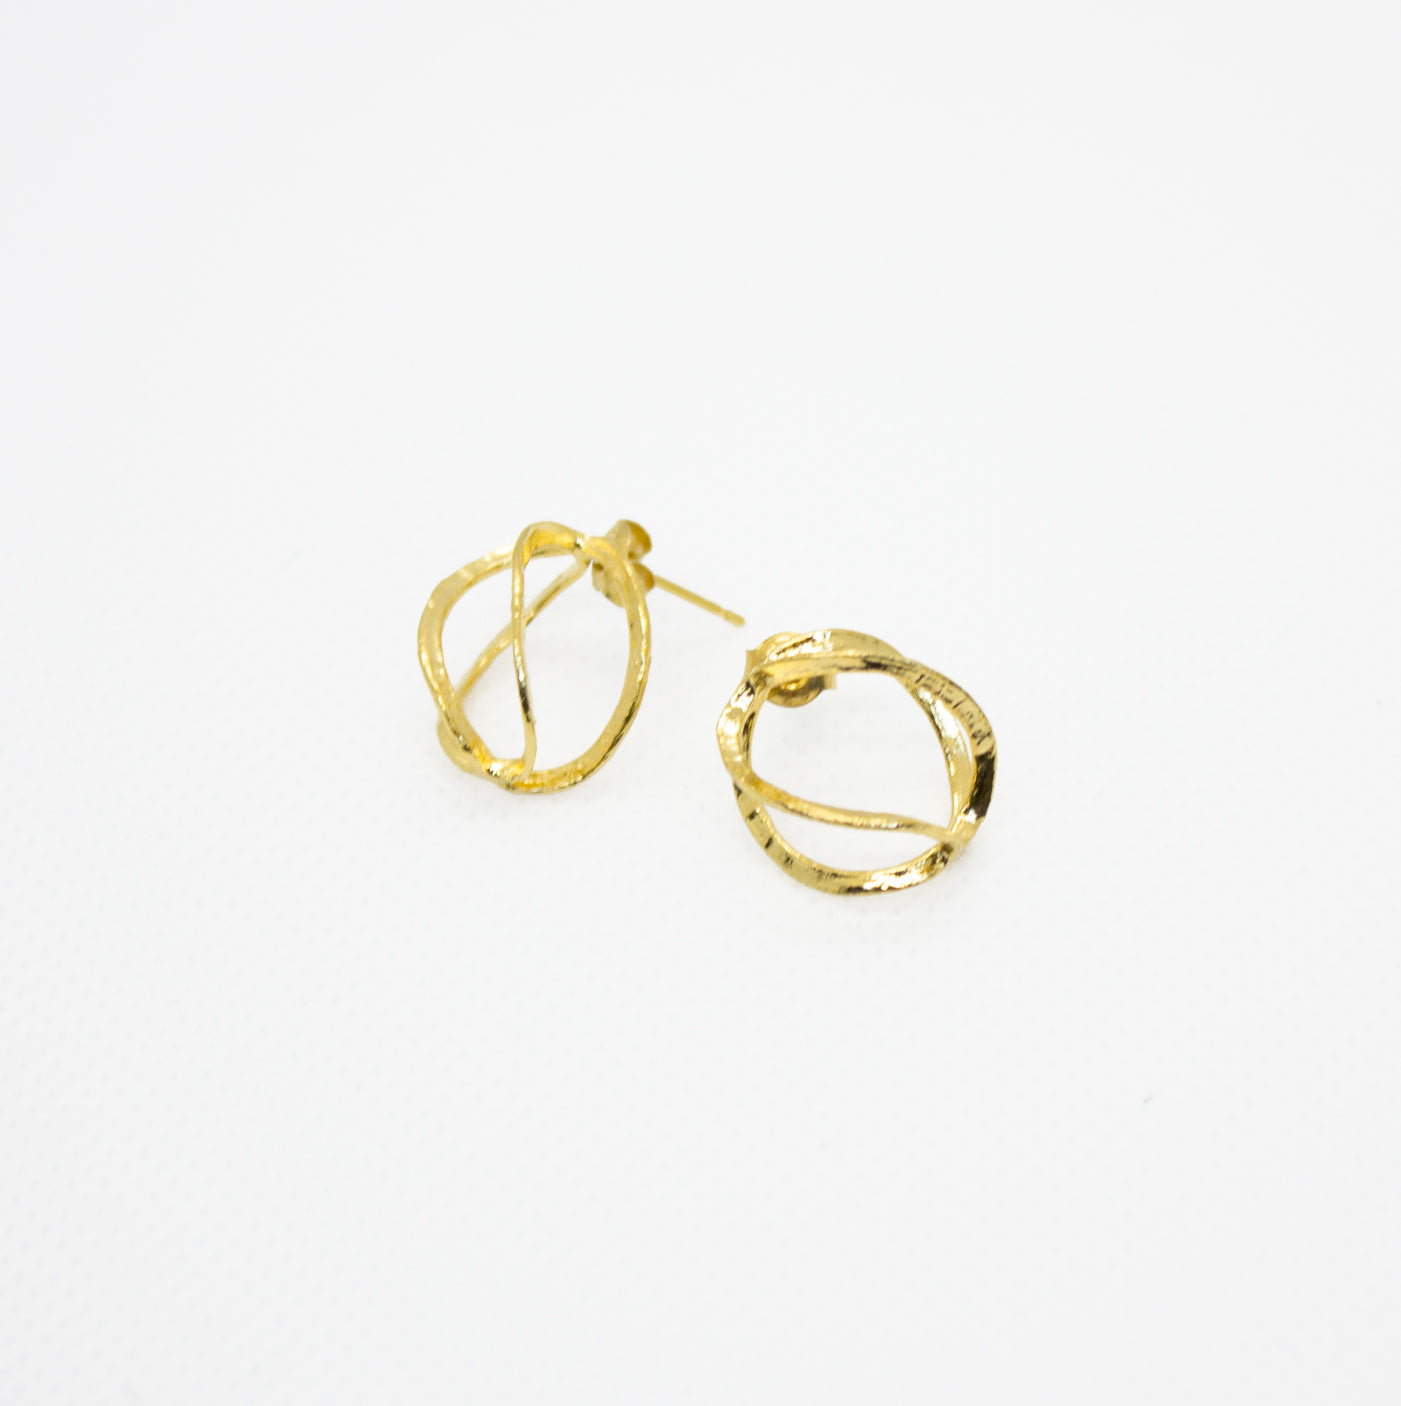 Earrings with Cage Shapes